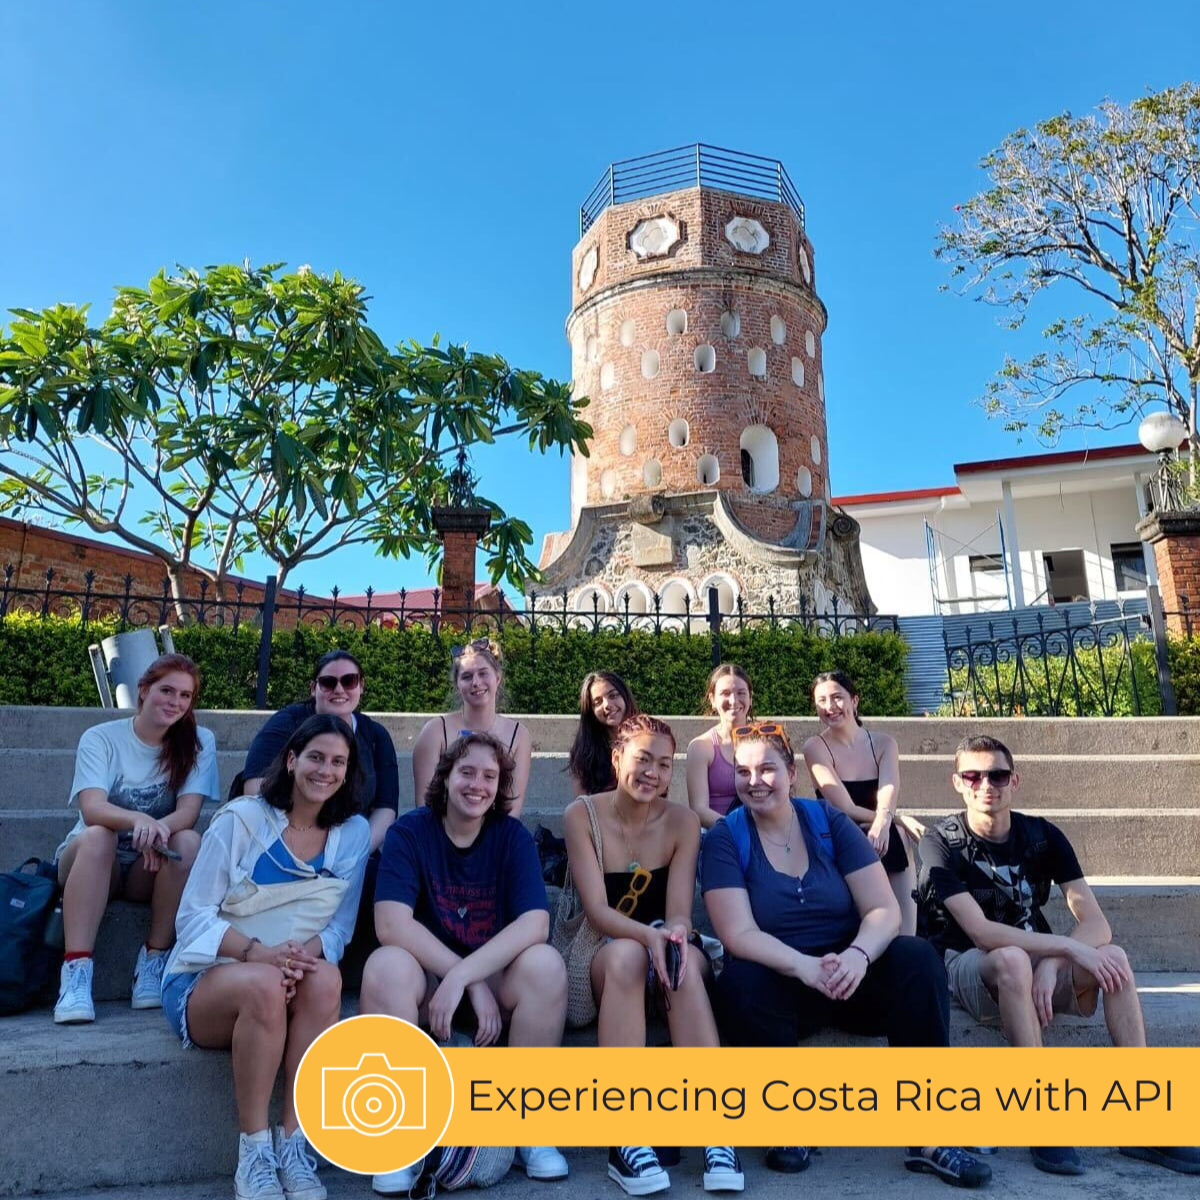 UMass Amherst students experiencing Costa Rica with API